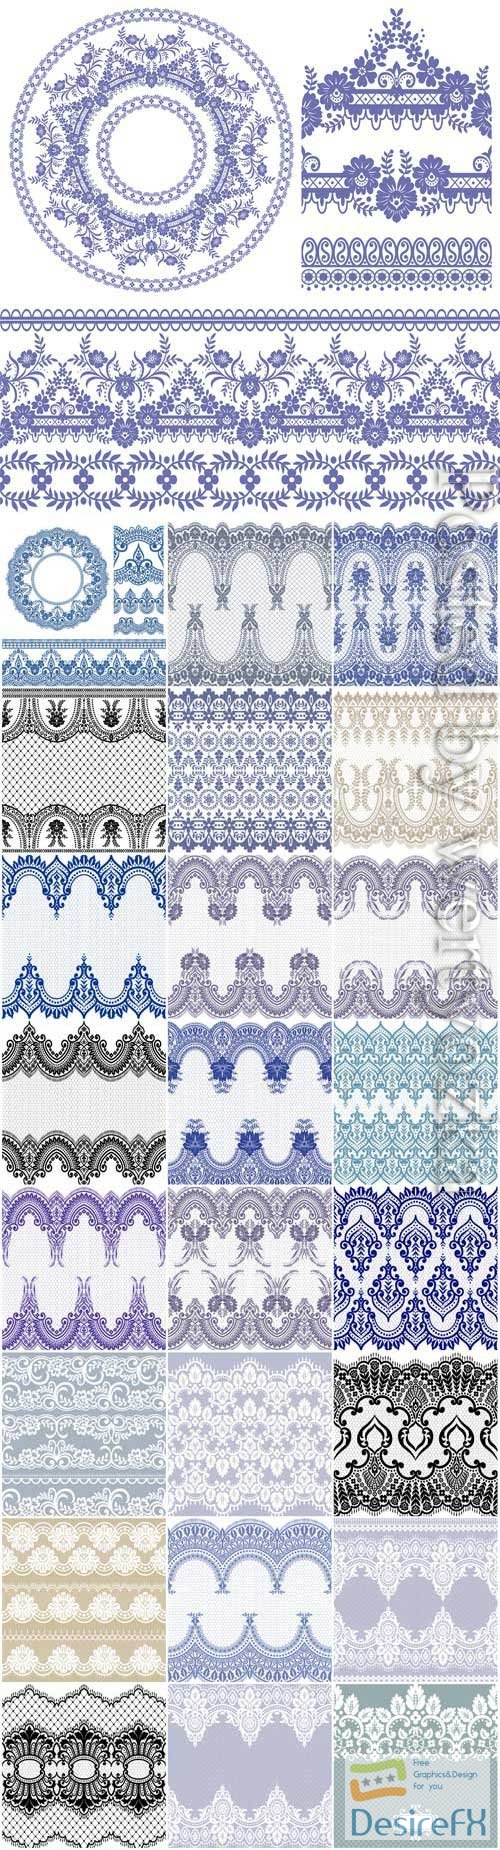 Backgrounds with lace beautiful patterns in vector